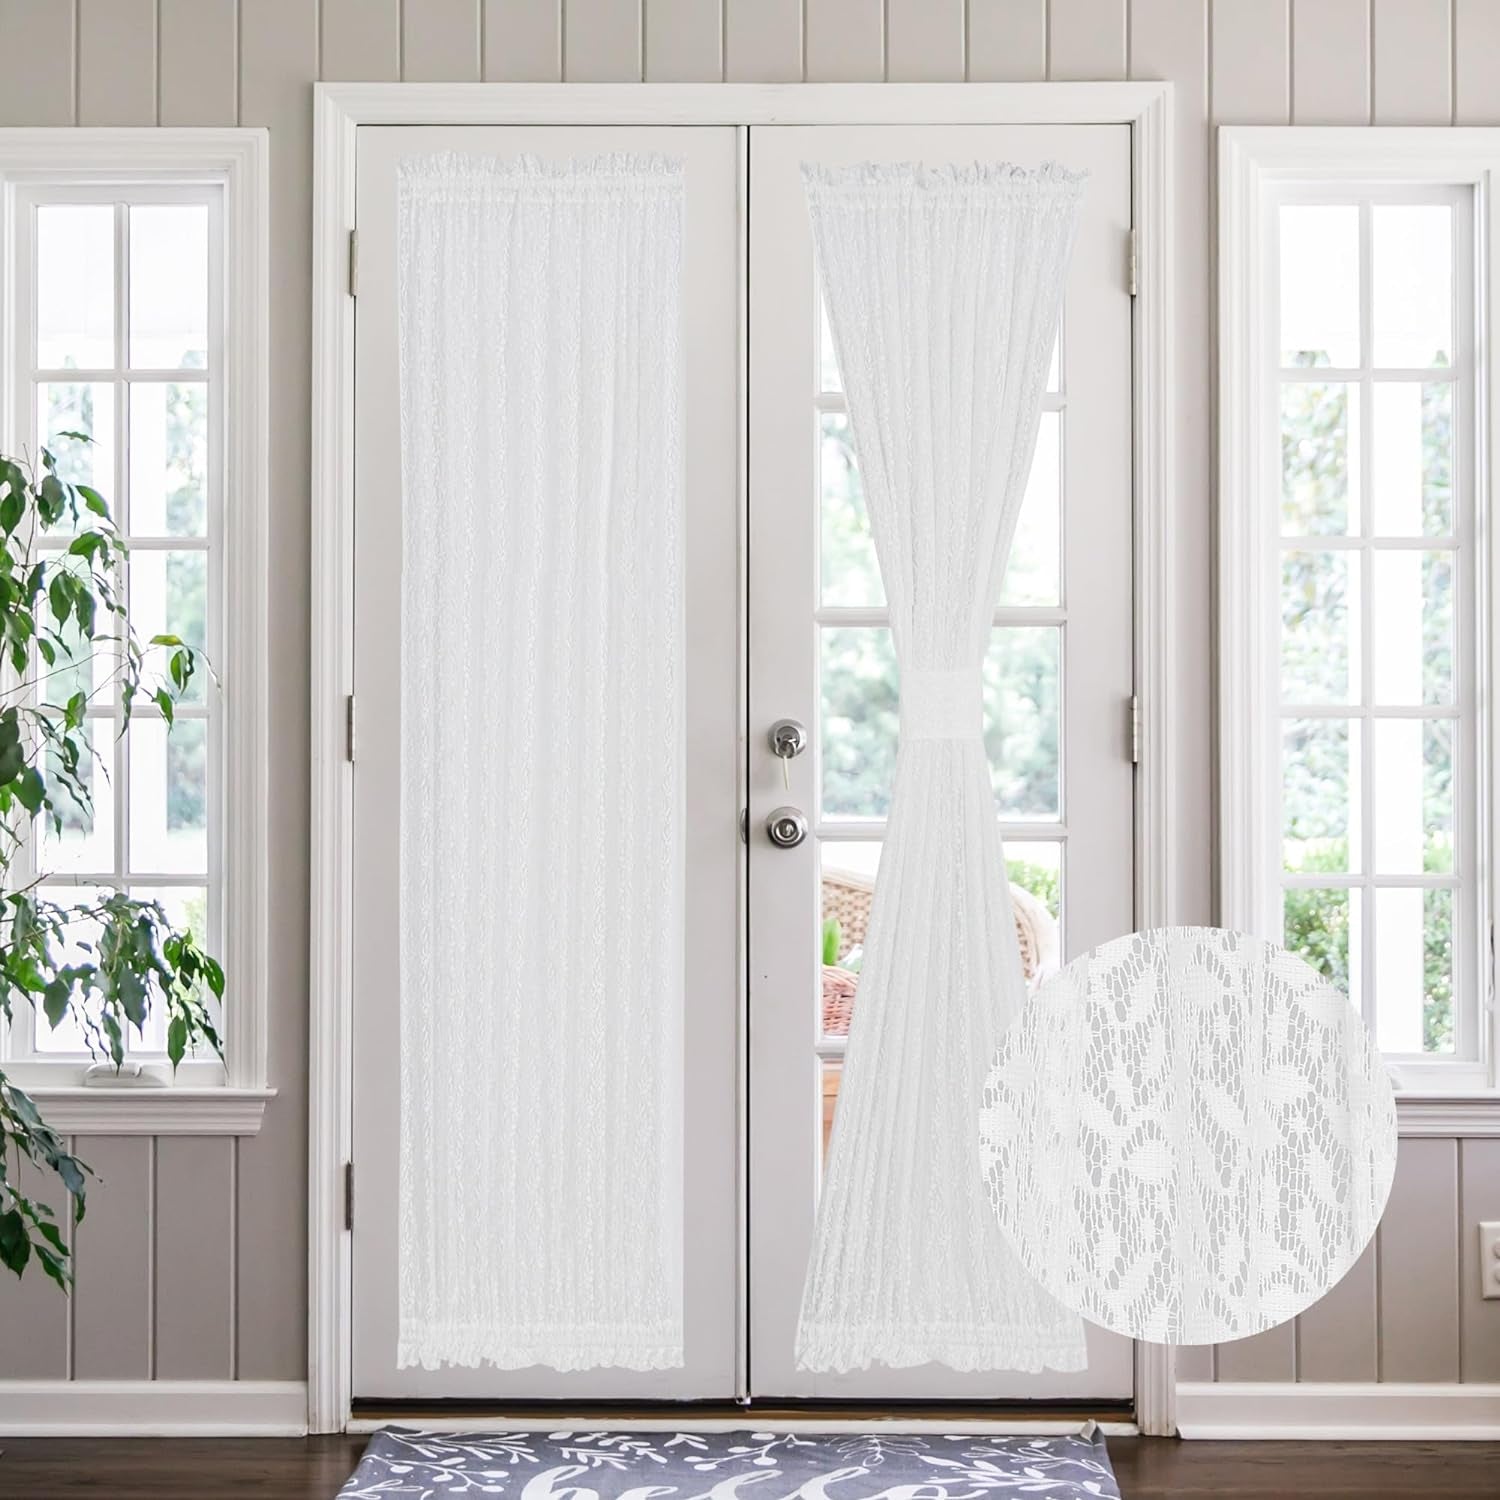 Rloncomix Green Lace French Door Curtain Leaf Branch Knitted Textured Glass Door Curtains Floral Semi Sheer Door Panel for Kitchen Patio Front Door Tieback Included, Single Panel, 52 X 72 Inch  RLoncomix White 52" X 72" 1 Pc 